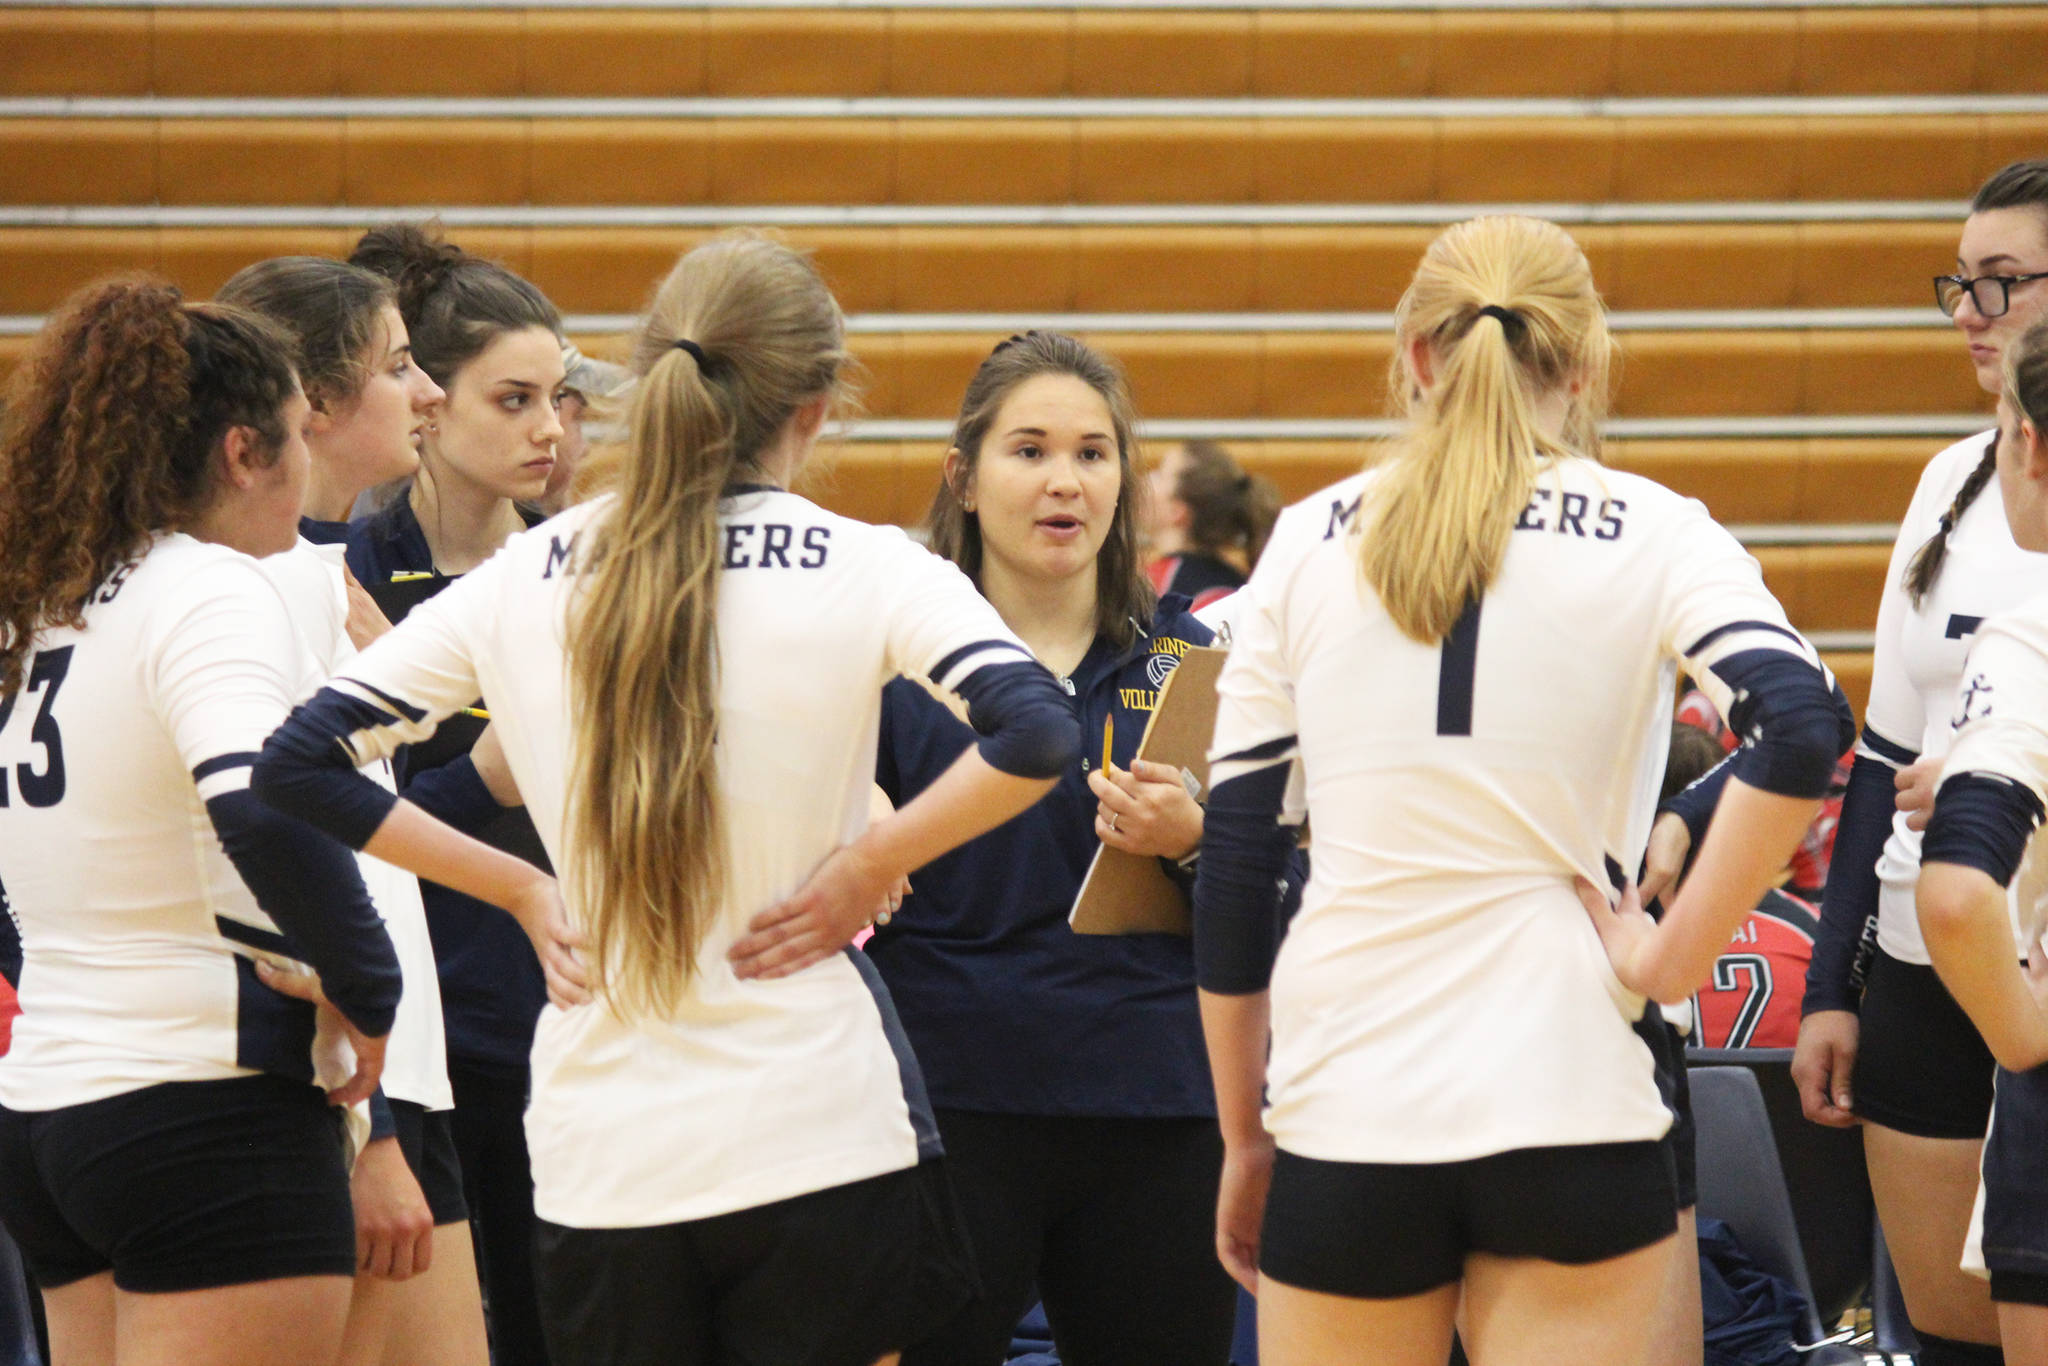 Sara Pennington, the new Homer head volleyball coach, talks to her players during a timeout in one of their games against Kenai Central High School in the Homer Jamboree, held Saturday, Aug. 18, 2018 at the high school in Homer, Alaska. Homer took third in the Jamboree. (Photo by Megan Pacer/Homer News)